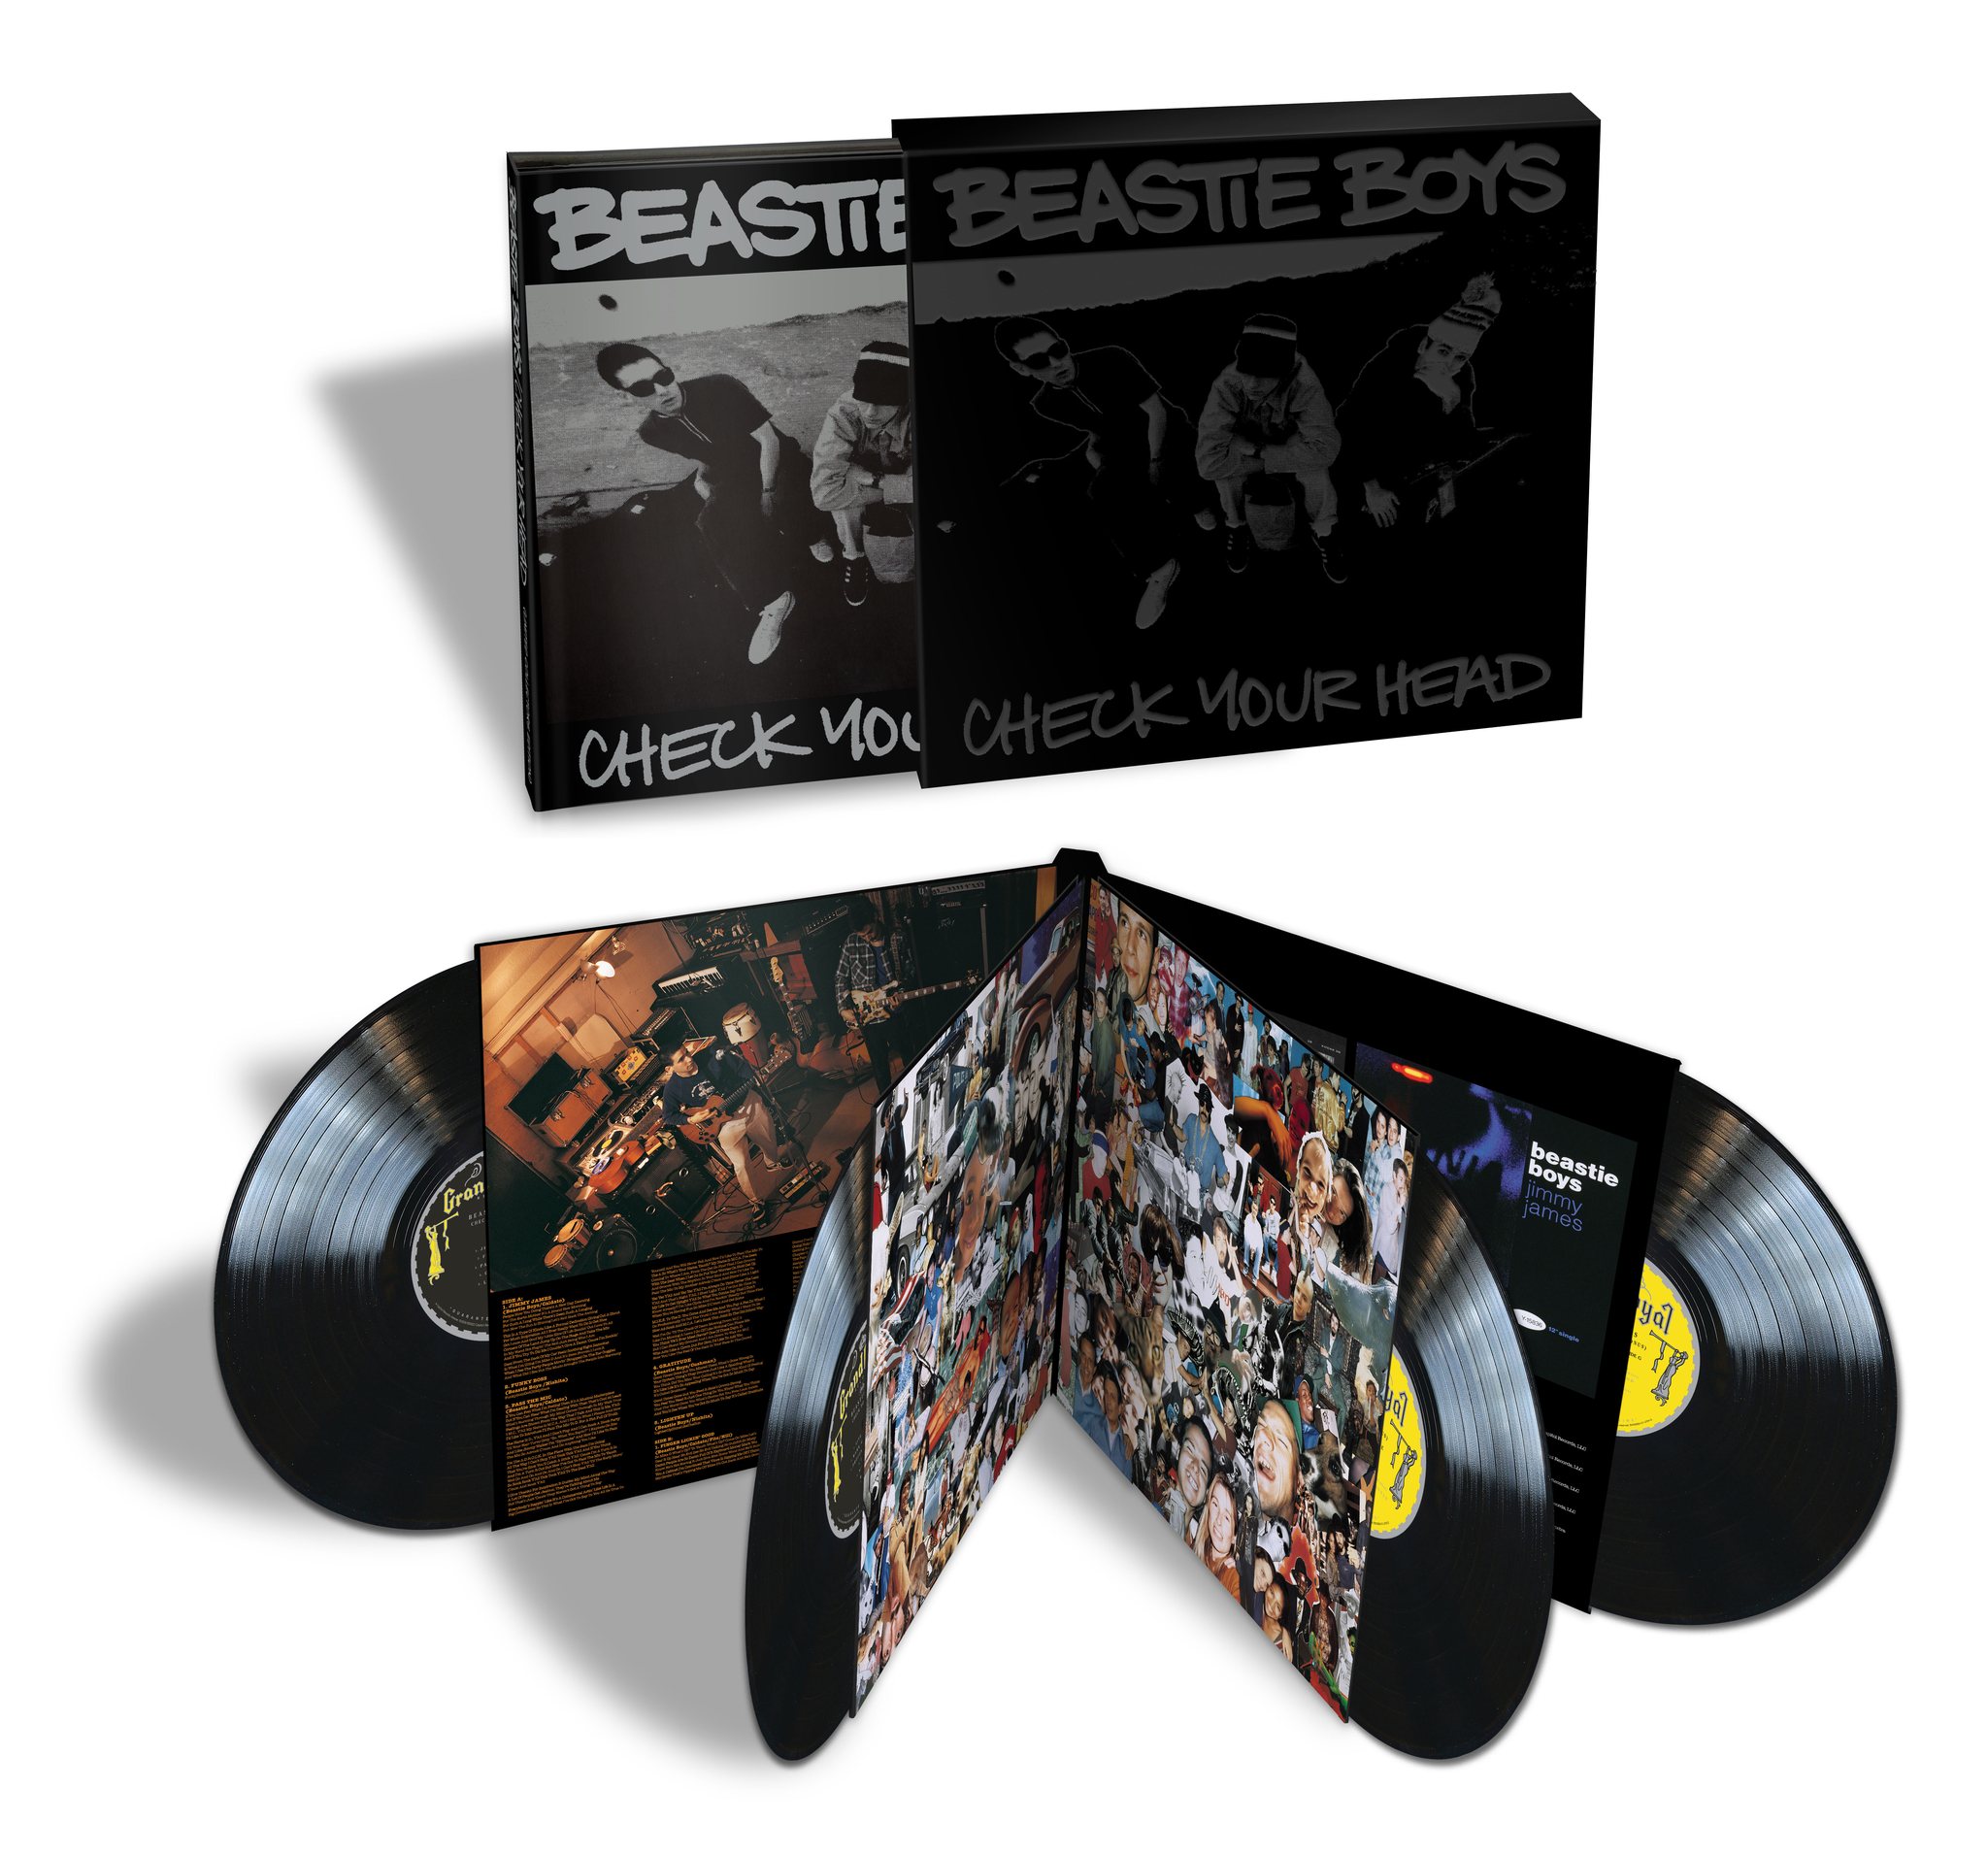 Beastie Boys Release Deluxe Vinyl Edition Of "Check Your Head" For 30th Anniversary